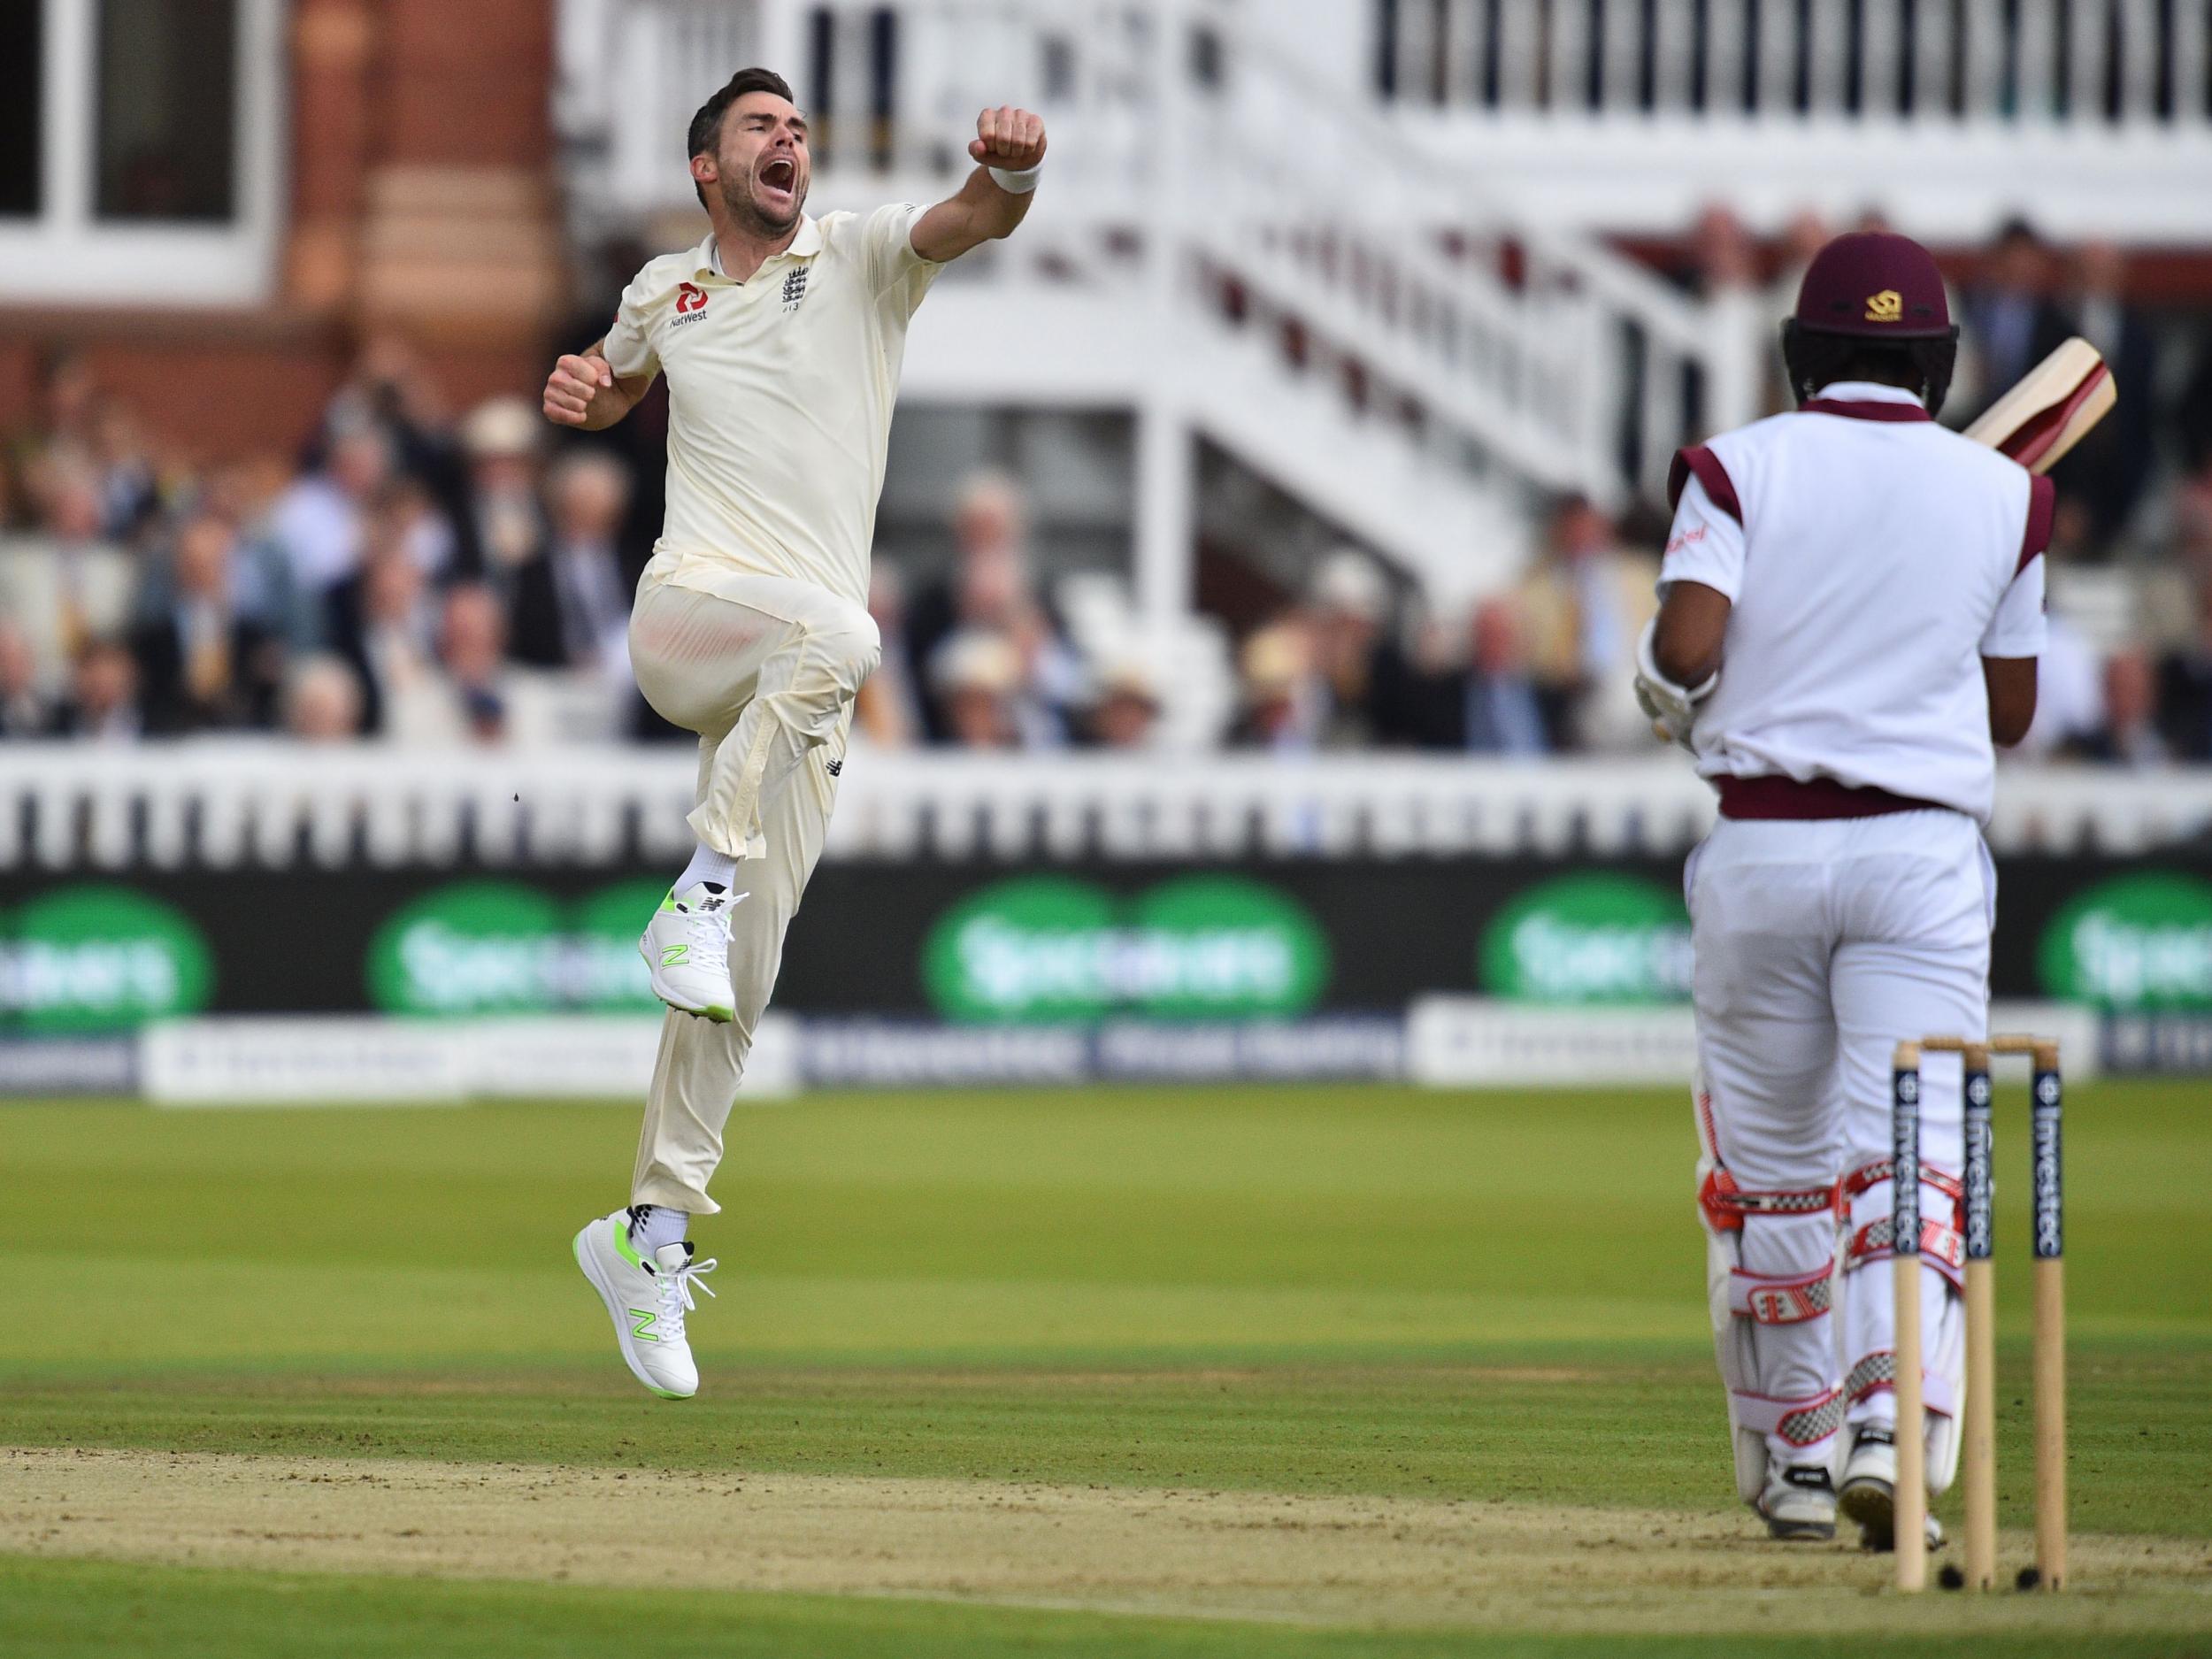 James Anderson's first Test wicket came at Lord's in 2003